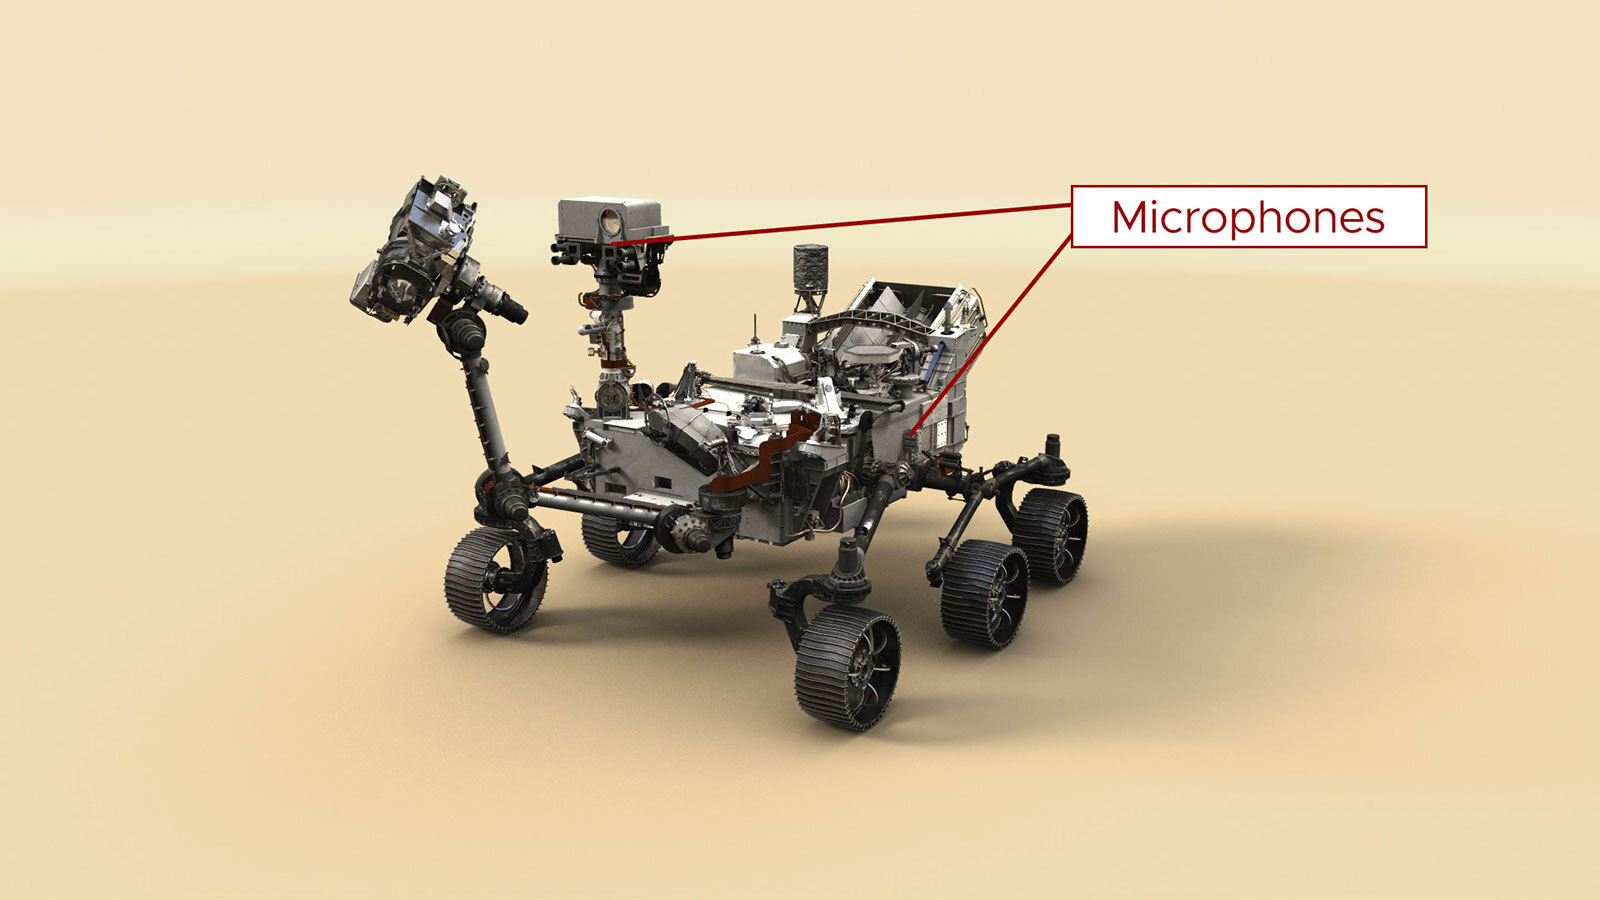 Hear Sounds From Mars Captured by NASA's Perseverance Rover